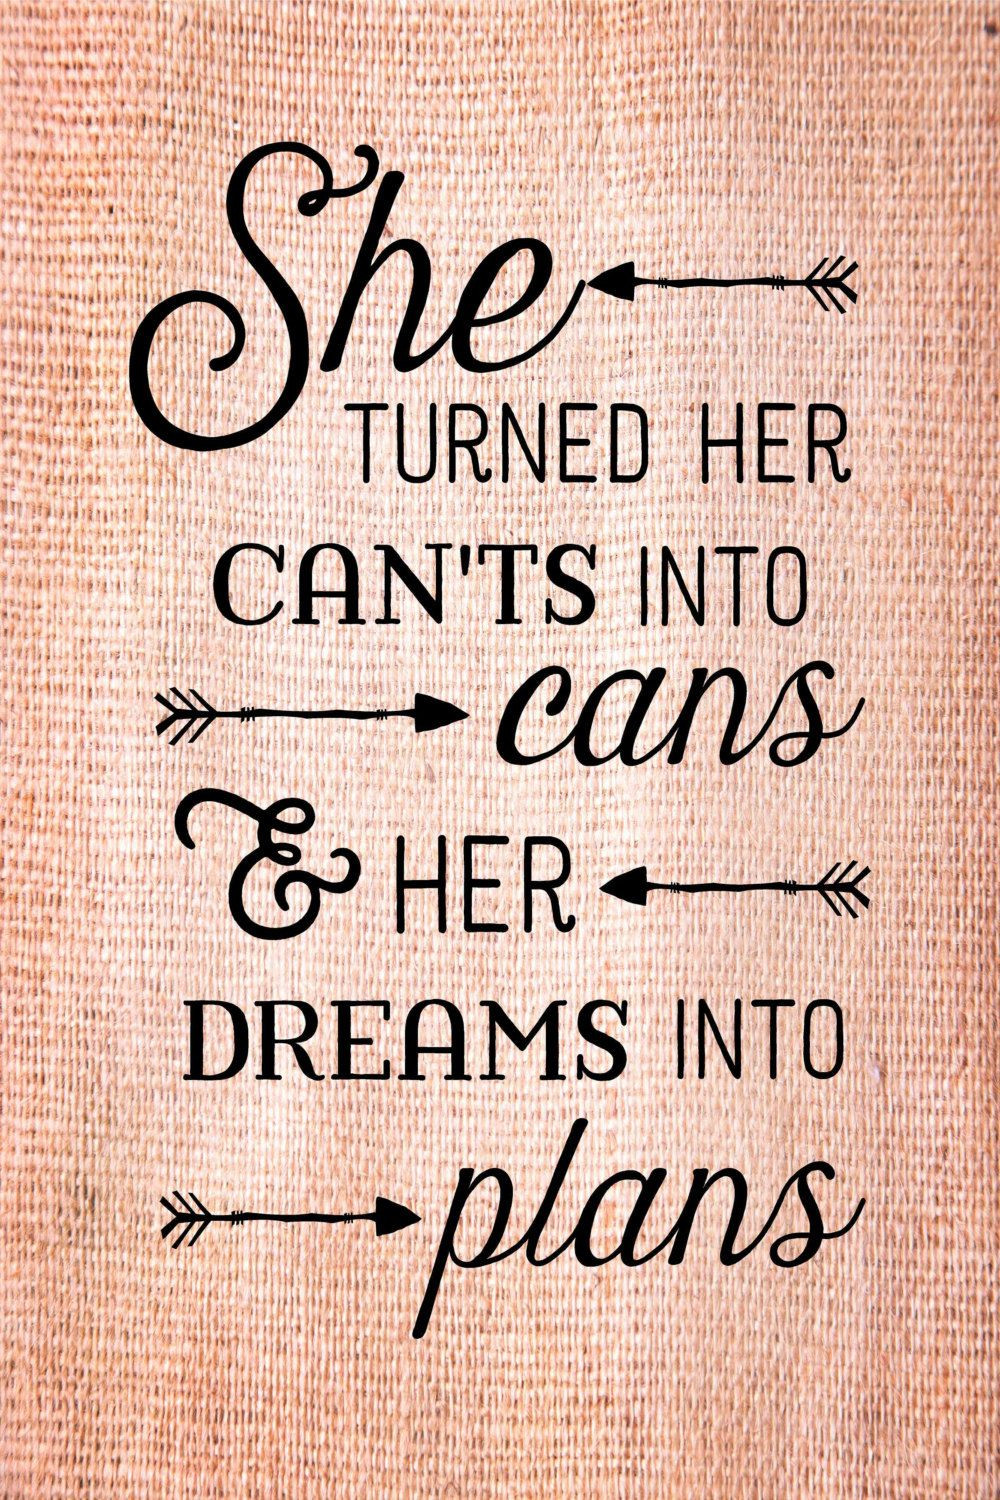 Inspirational Quotes For College Graduates
 Graduation Gift She turned her can ts into cans dreams